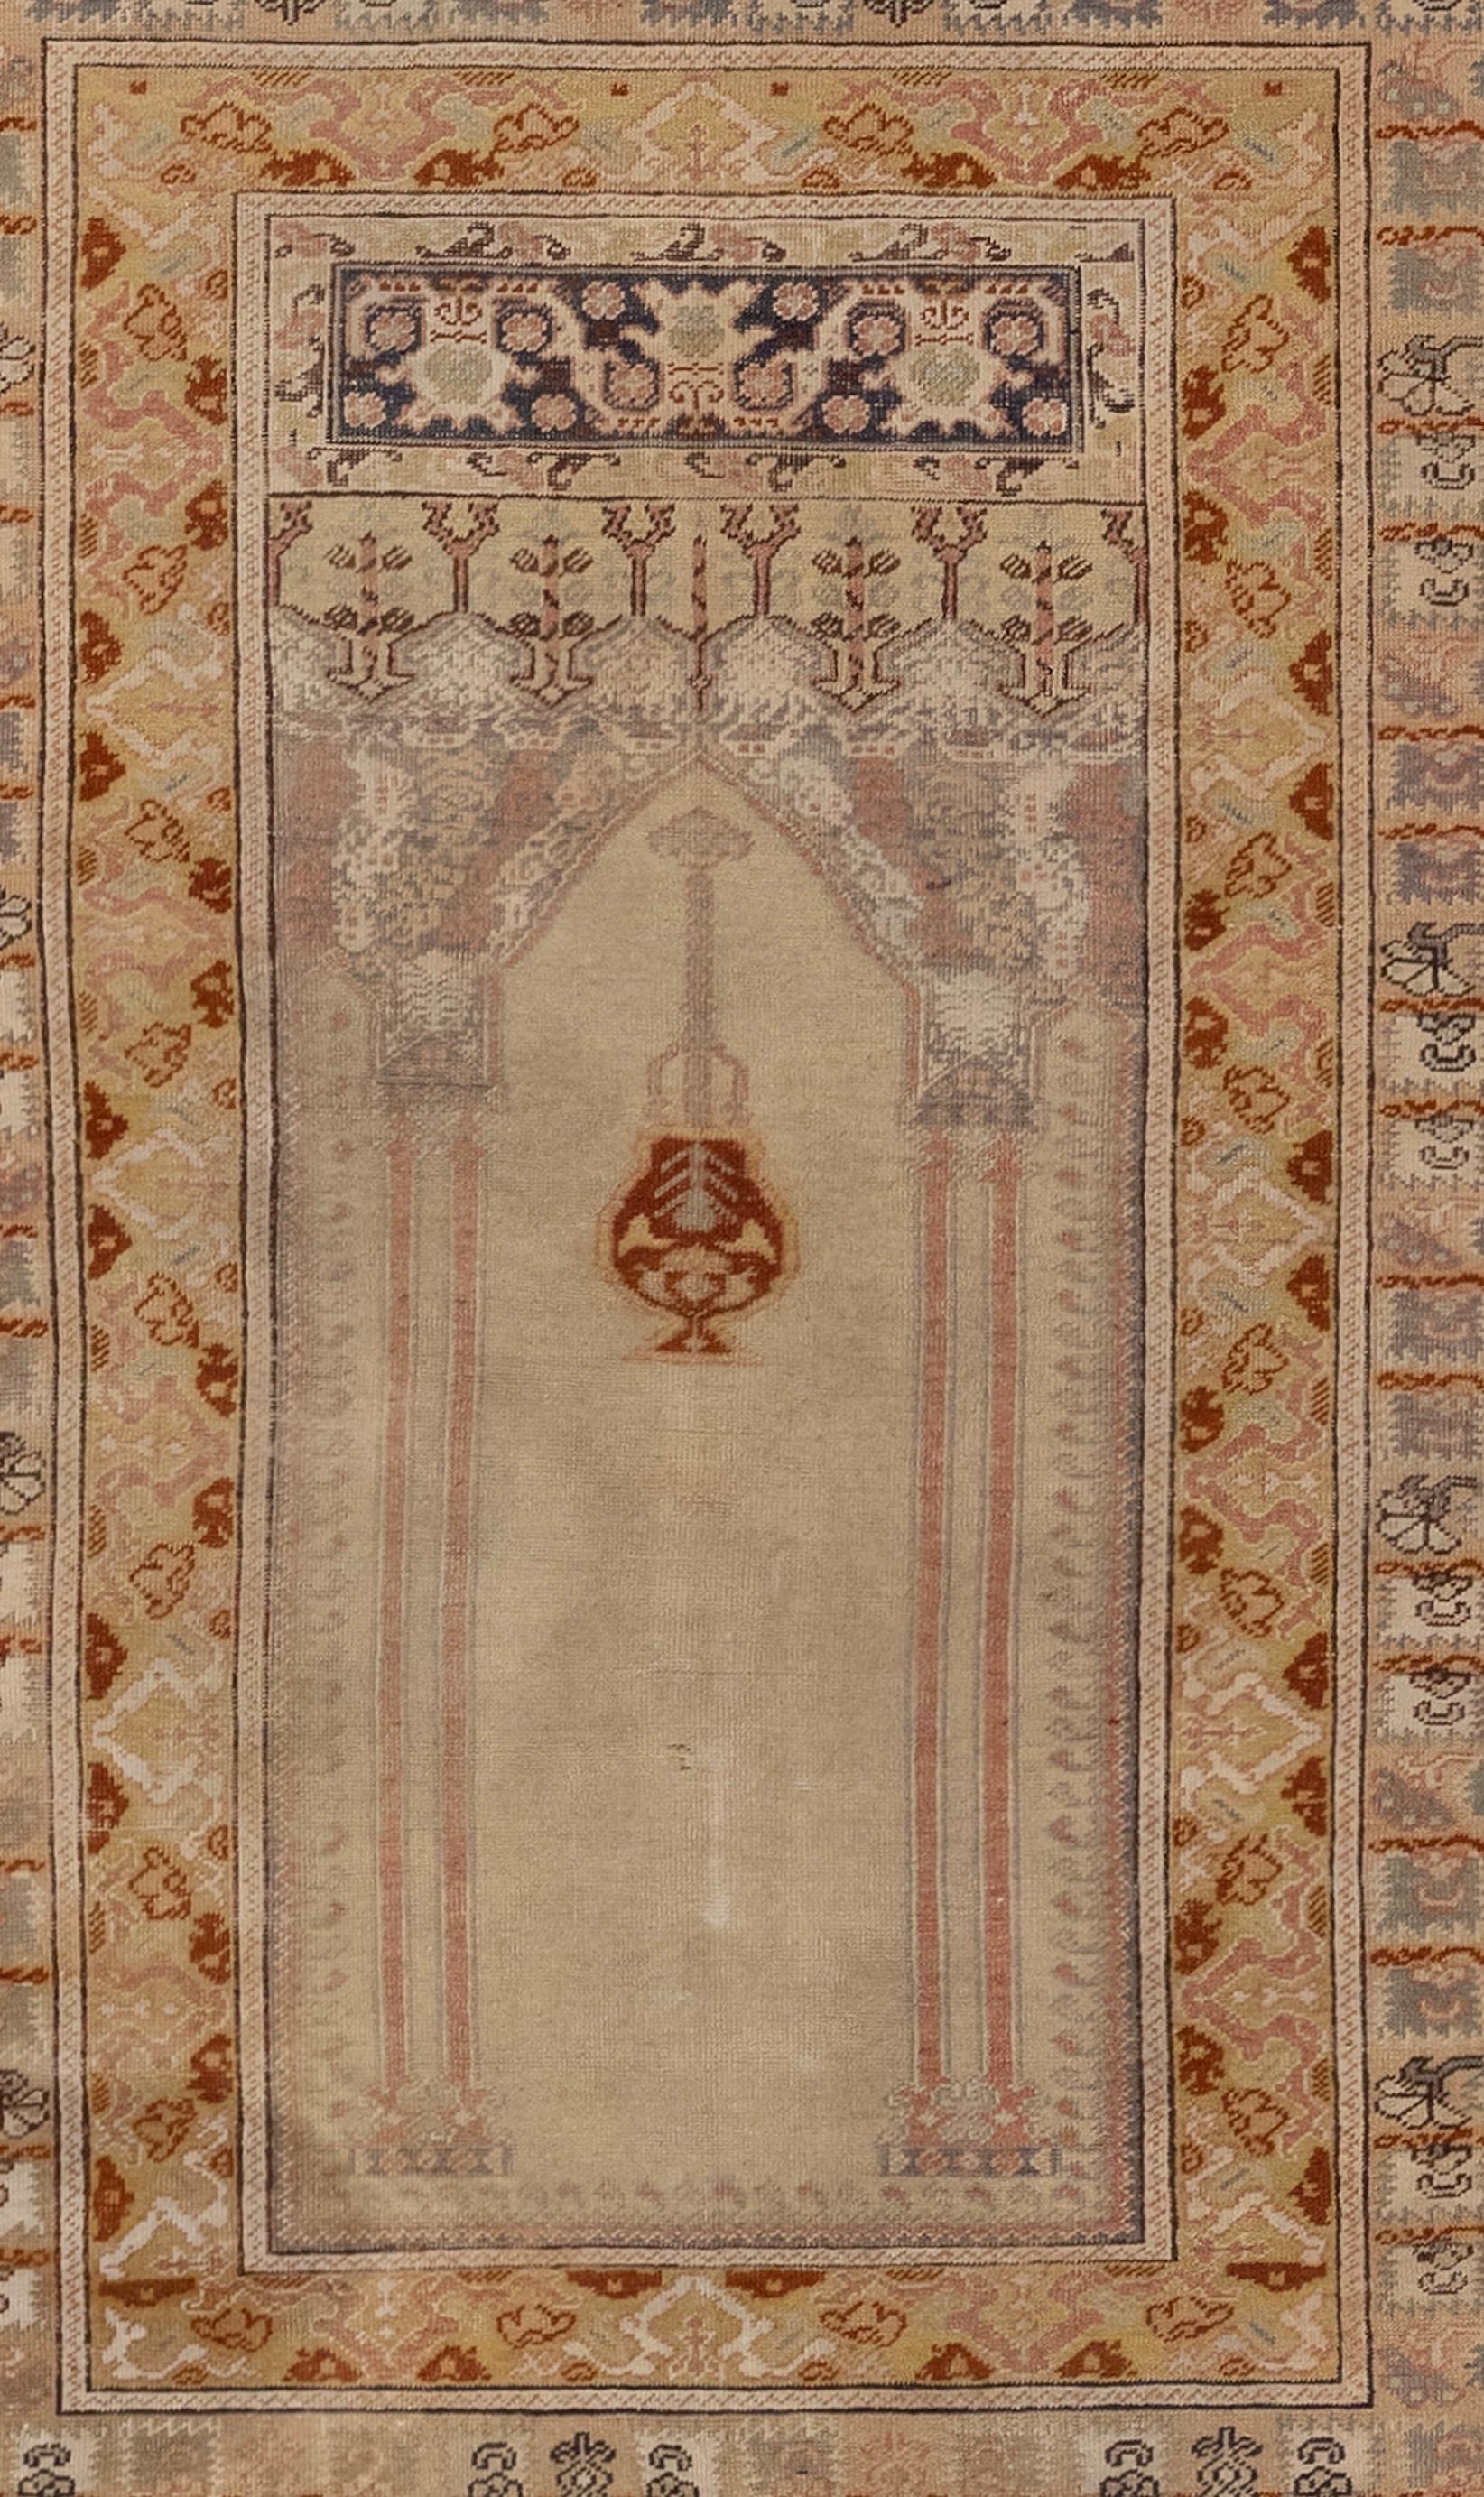 An antique Turkish Kaiseri prayer rug from the 1900s. It features a finely woven silk in the Turkish style with an ecru field. The rug has a scalloped top with a mosque lamp and two ornamental columns supporting a deep spandrel panel. Above and